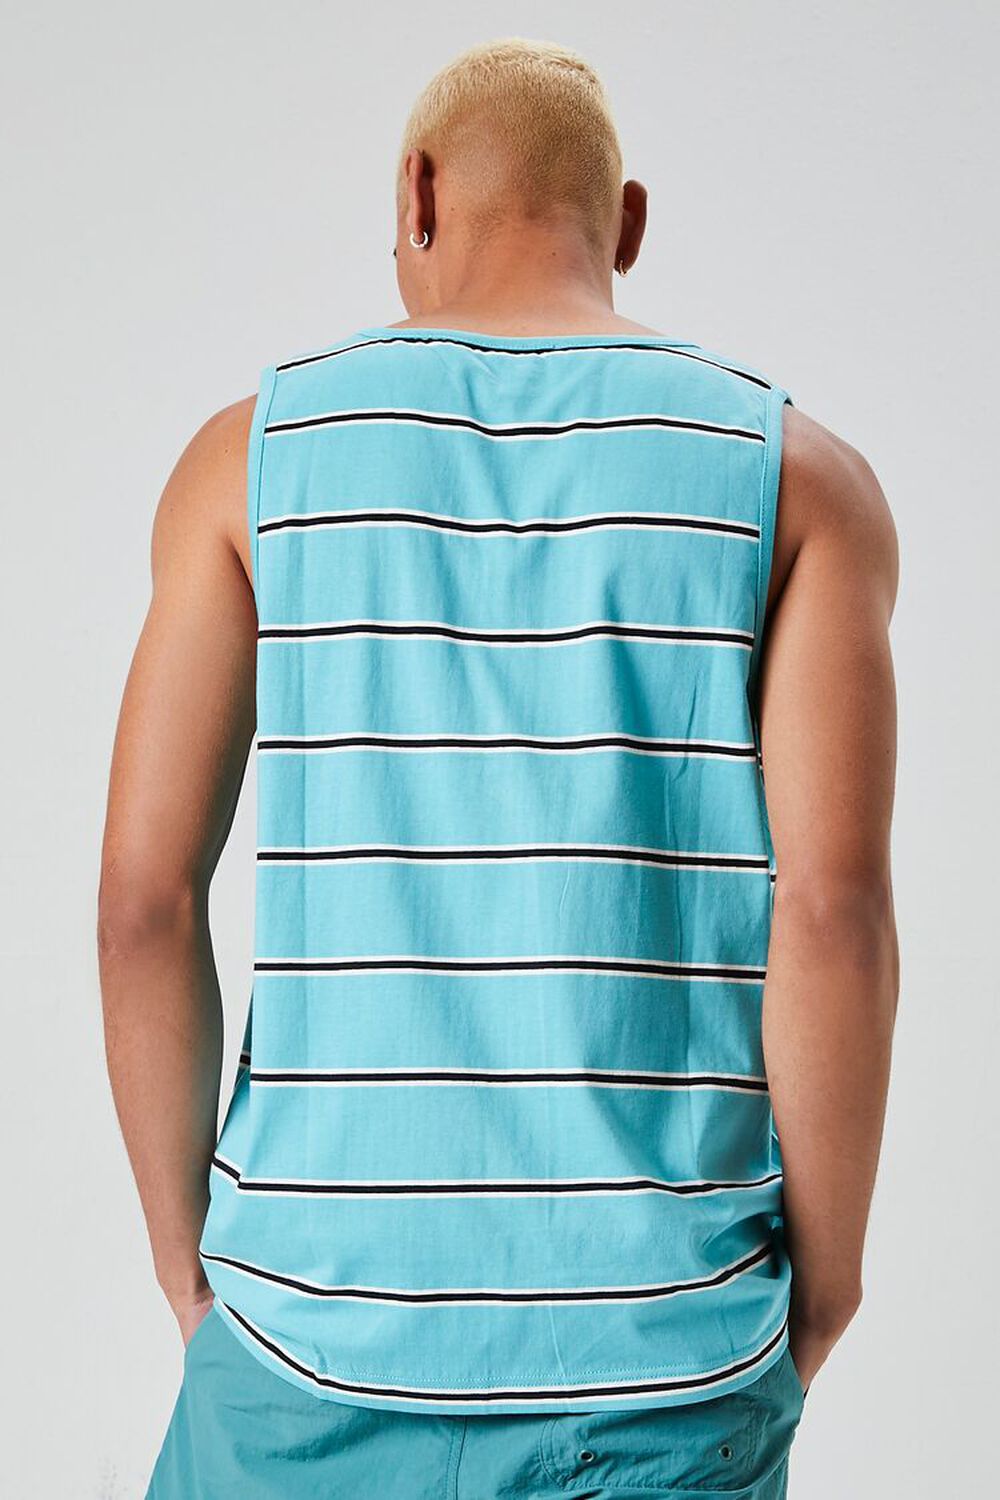 TEAL/MULTI Embroidered Earth Striped Tank Top, image 3